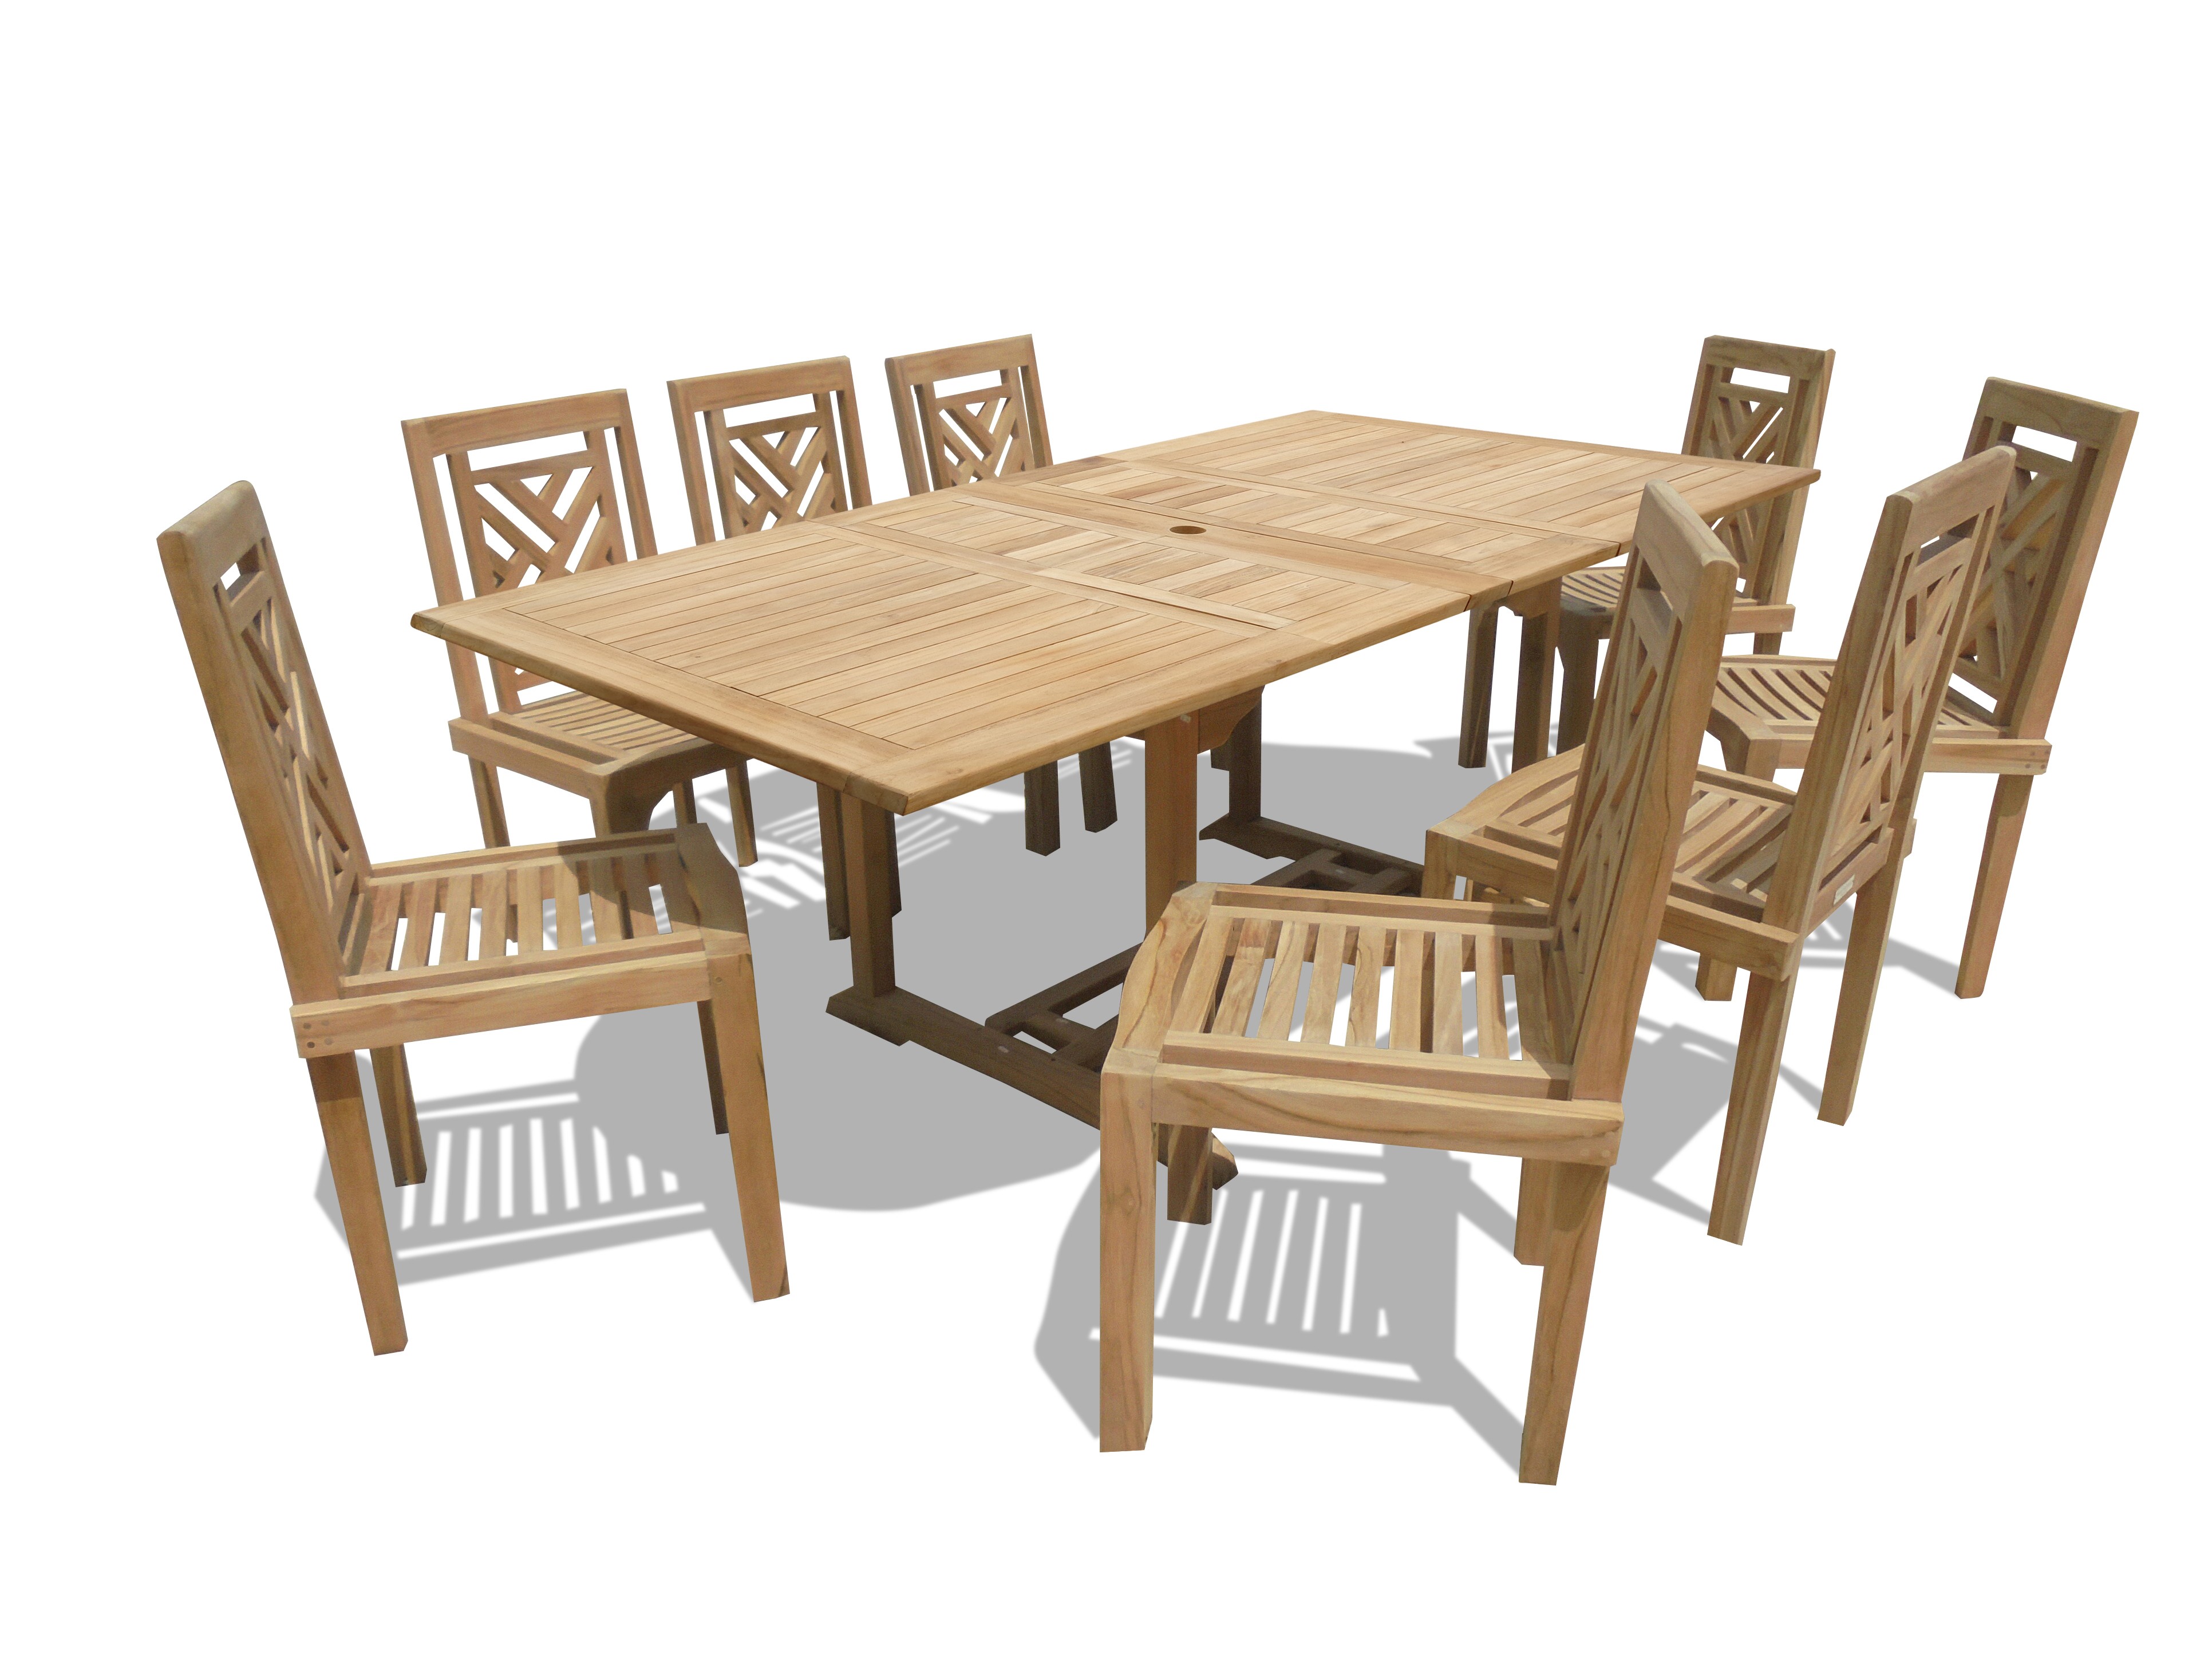 Buckingham 82" x 39" Double Leaf Rectangular Extension Teak Table W/8 Chippendale Stacking Chairs...seats 8